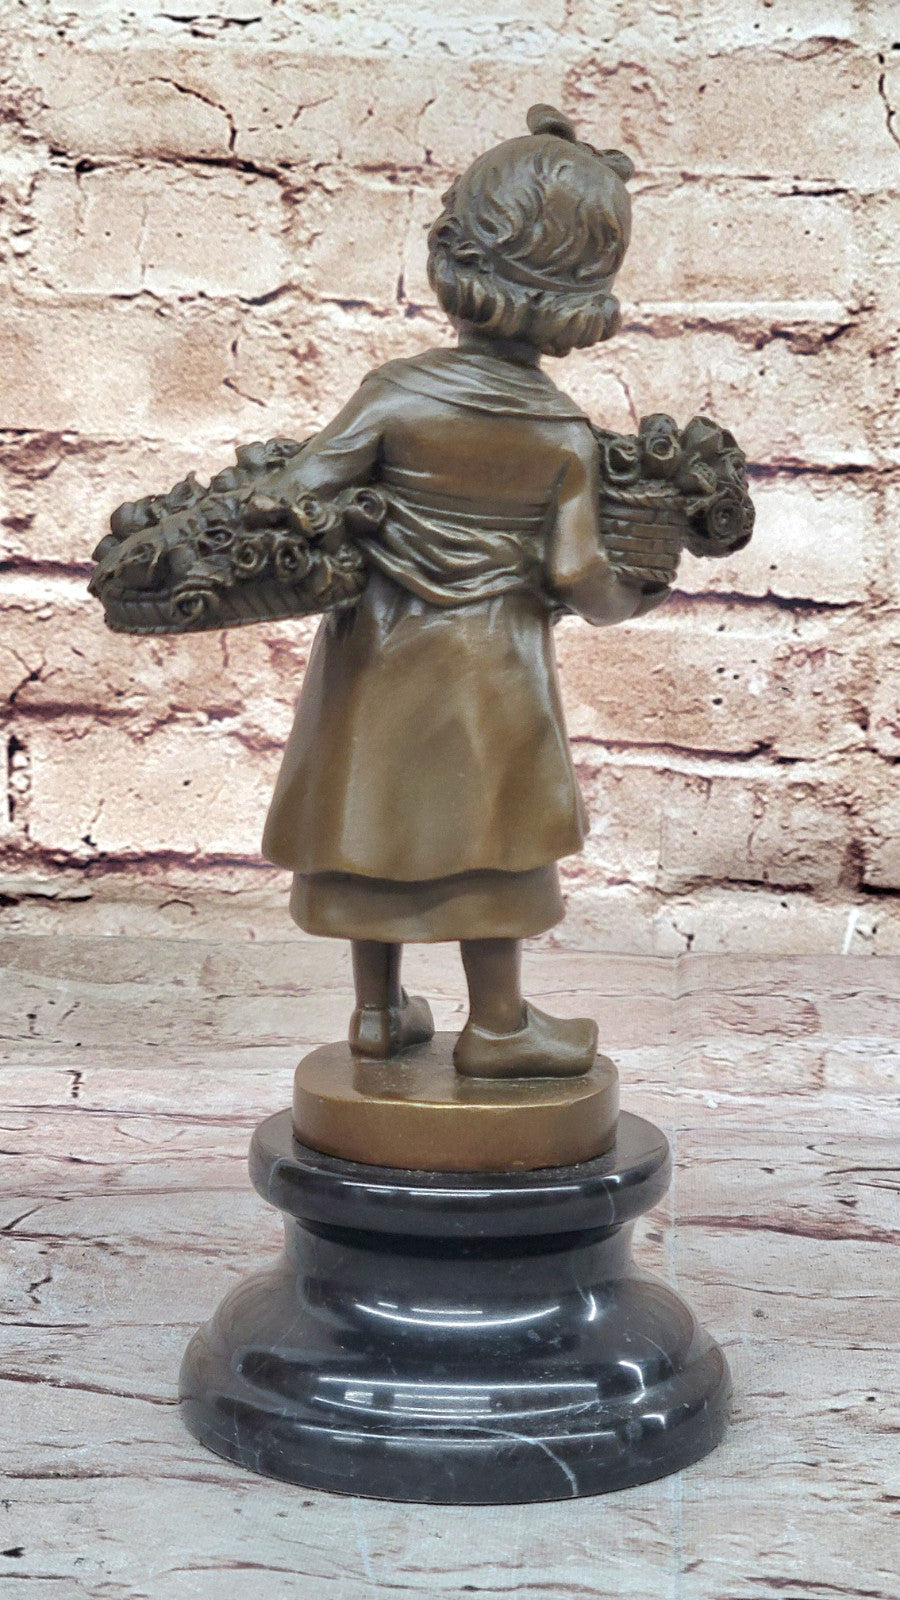 Signed Daste Art: Young Girl Figurine, Handcrafted Bronze Statue for Home Office